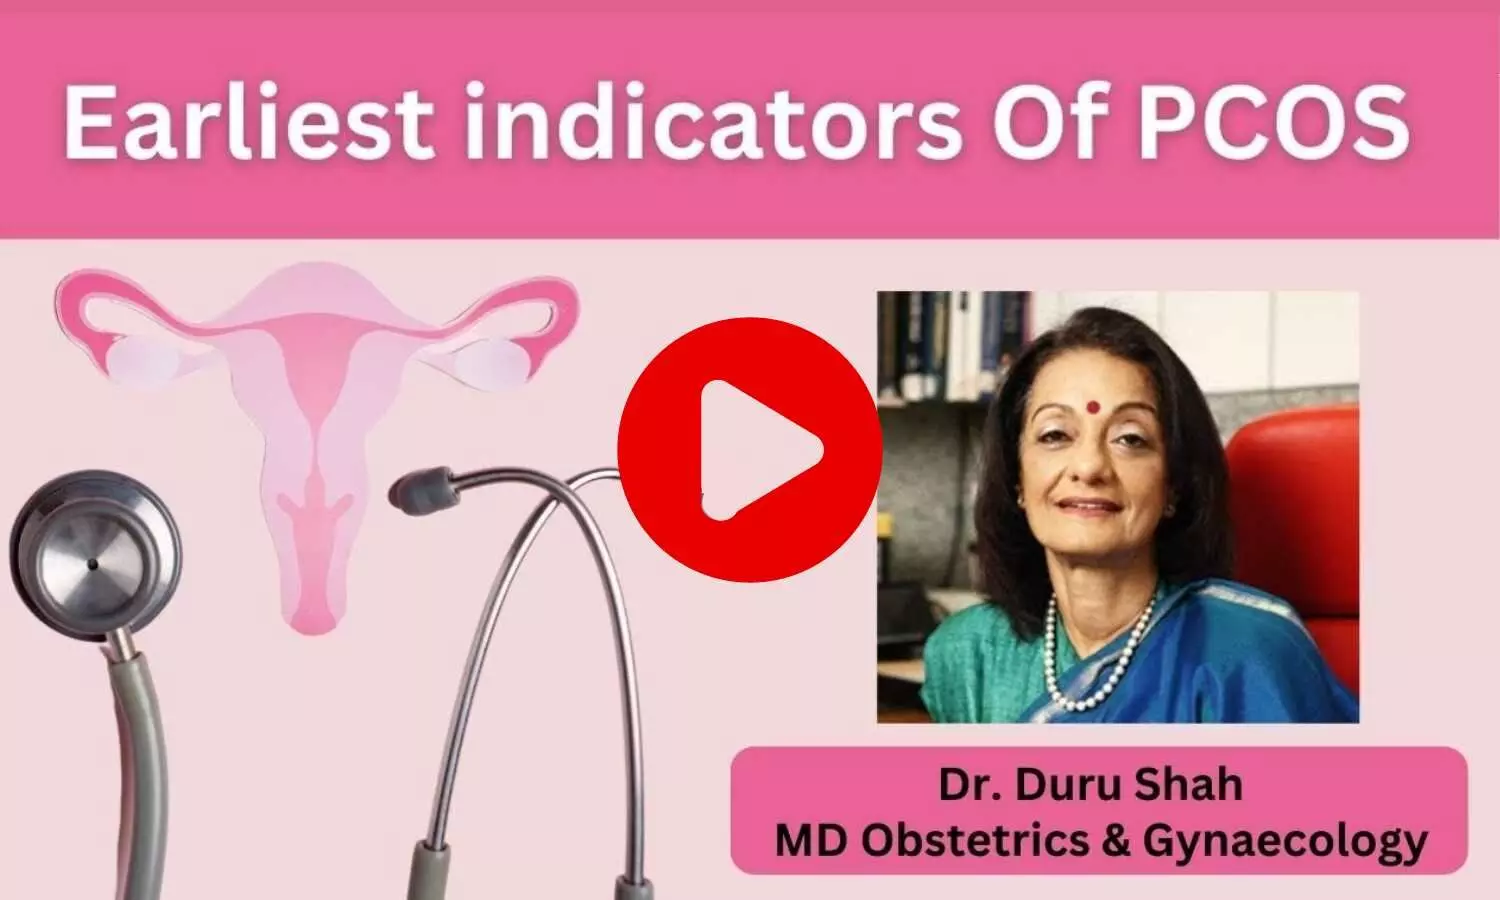 Early indicators of PCOS Screening- Ft. Dr. Duru Shah, MD (Obstetrics & Gynaecology)